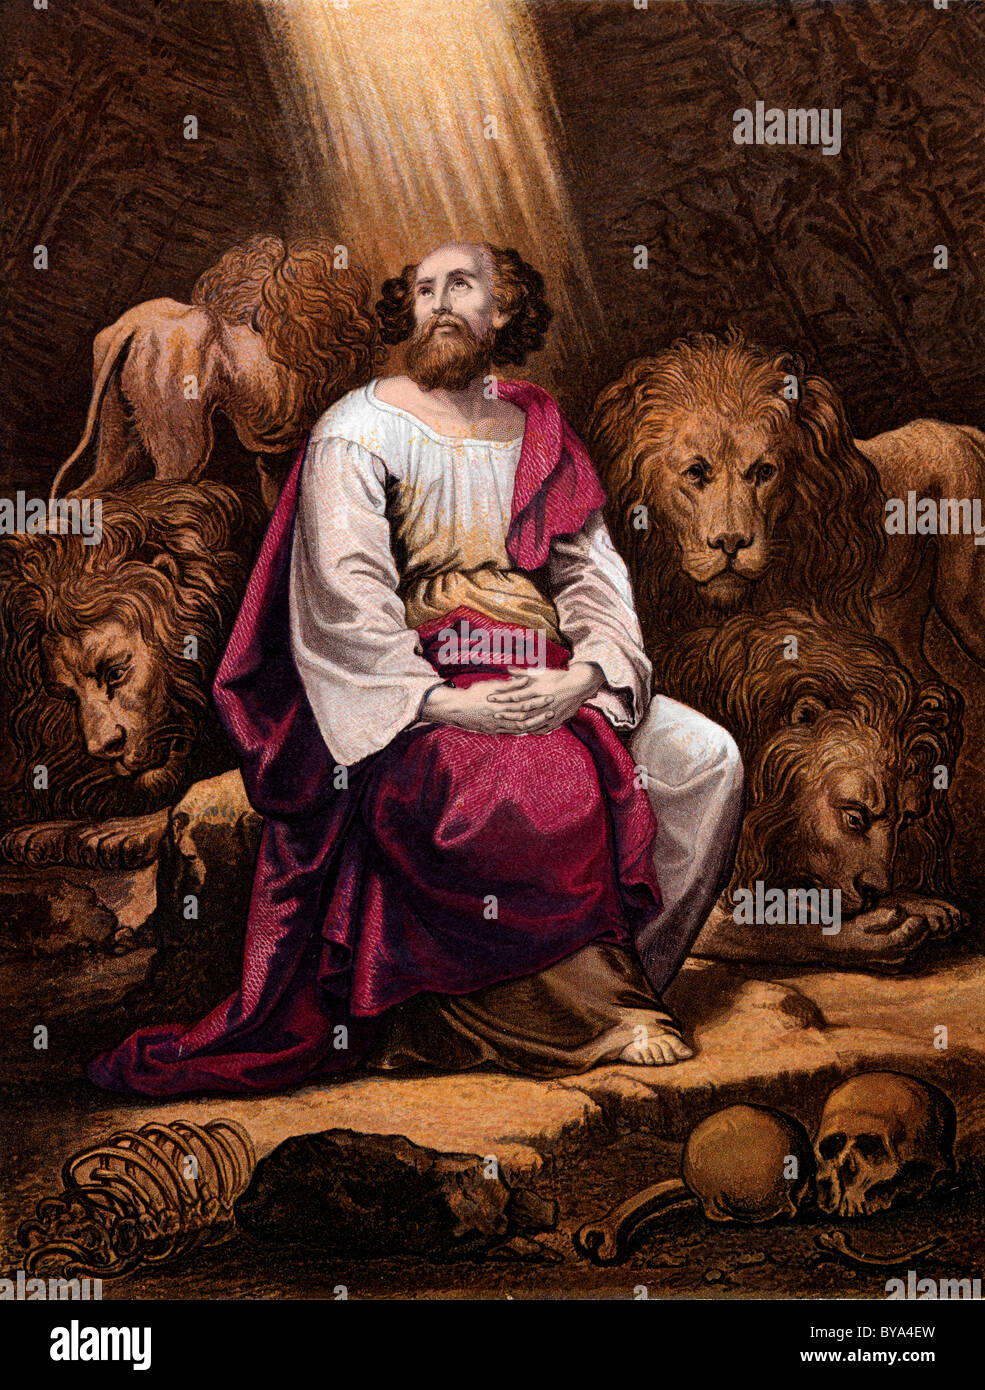 Bible Stories Illustration Of Daniel In The Den Of Lions Stock Photo